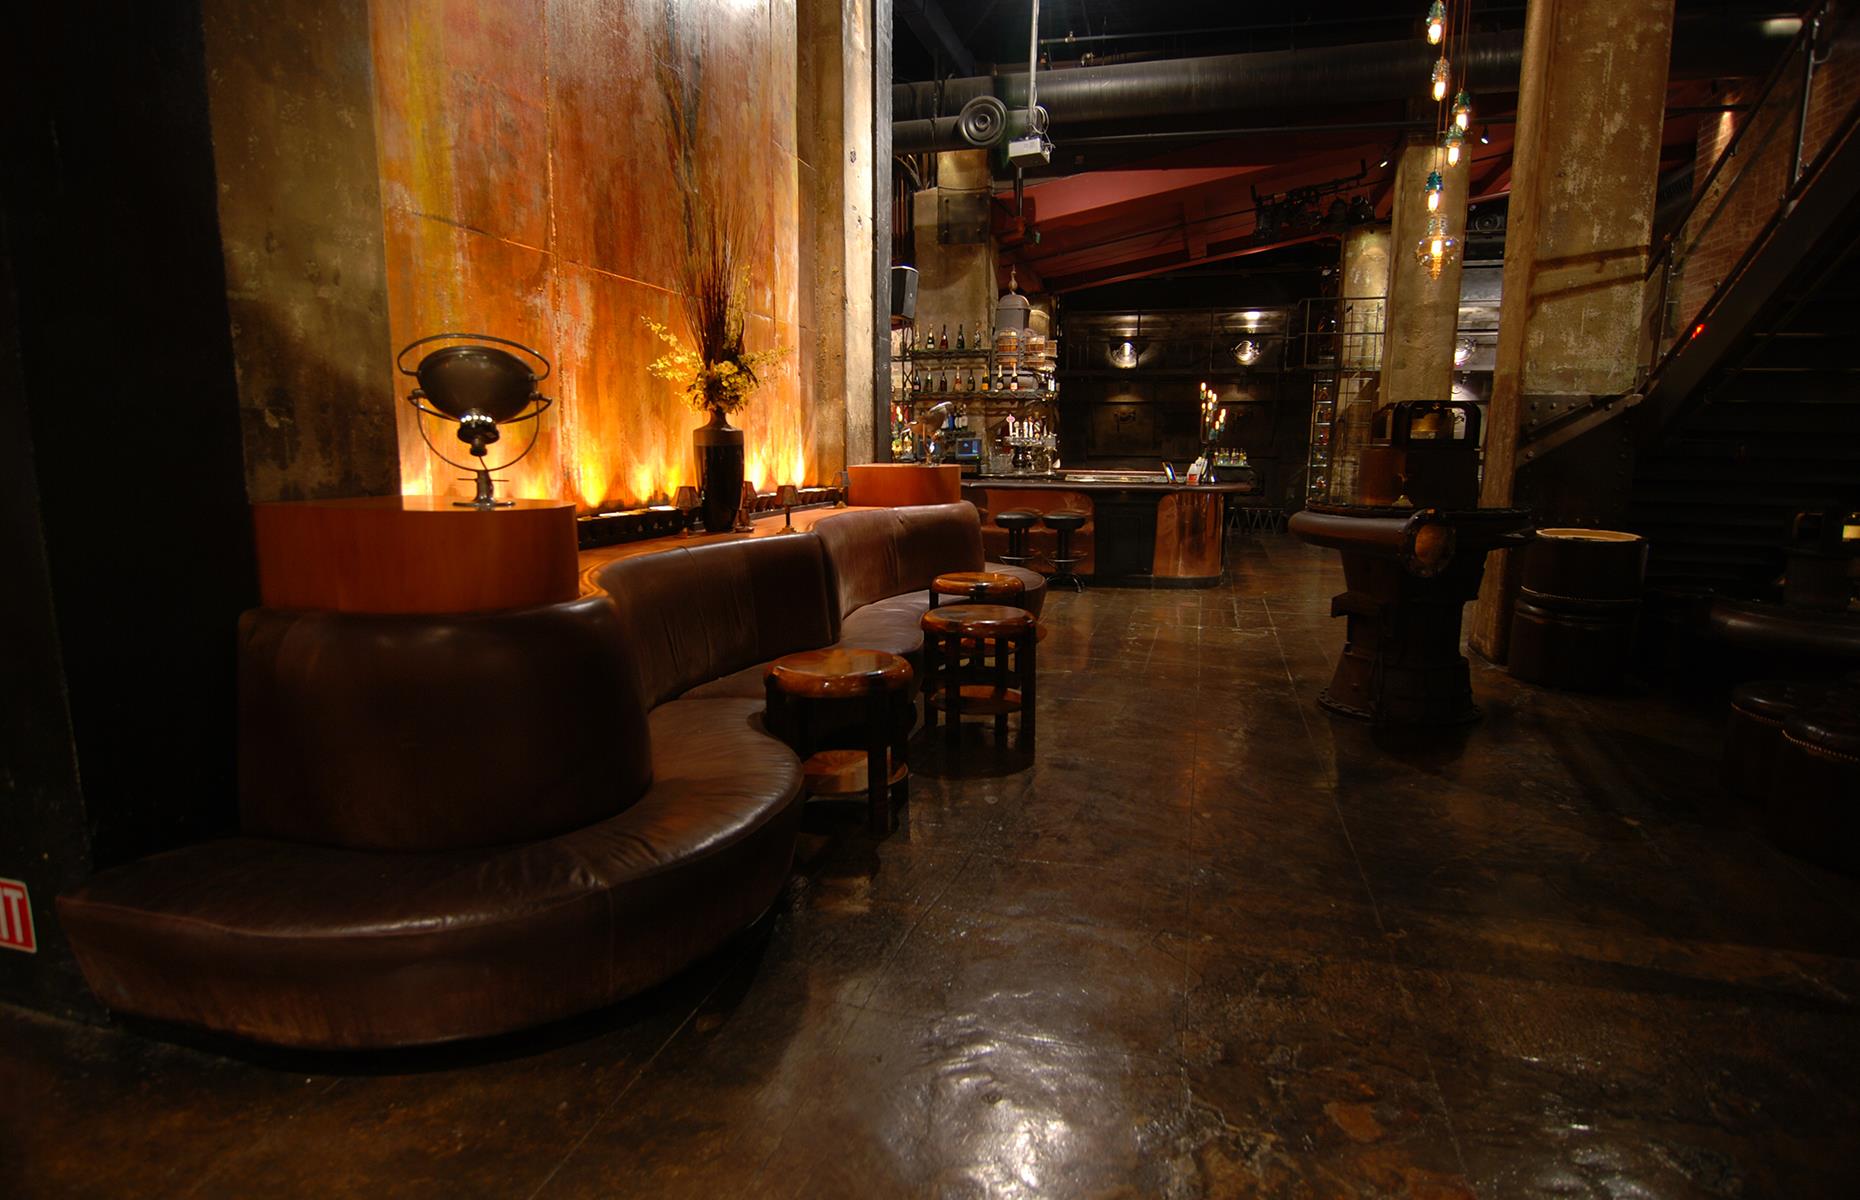 <p>What do you do with the basement that housed Los Angeles’ first power plant? You turn it into a bar of course, keeping the turbine steam generators and utility tunnels as a feature. Enter <a href="https://www.edisondowntown.com/">The Edison</a>, one of the hottest spots in downtown LA, legendary for its cocktails and fizzing burlesque shows.</p>